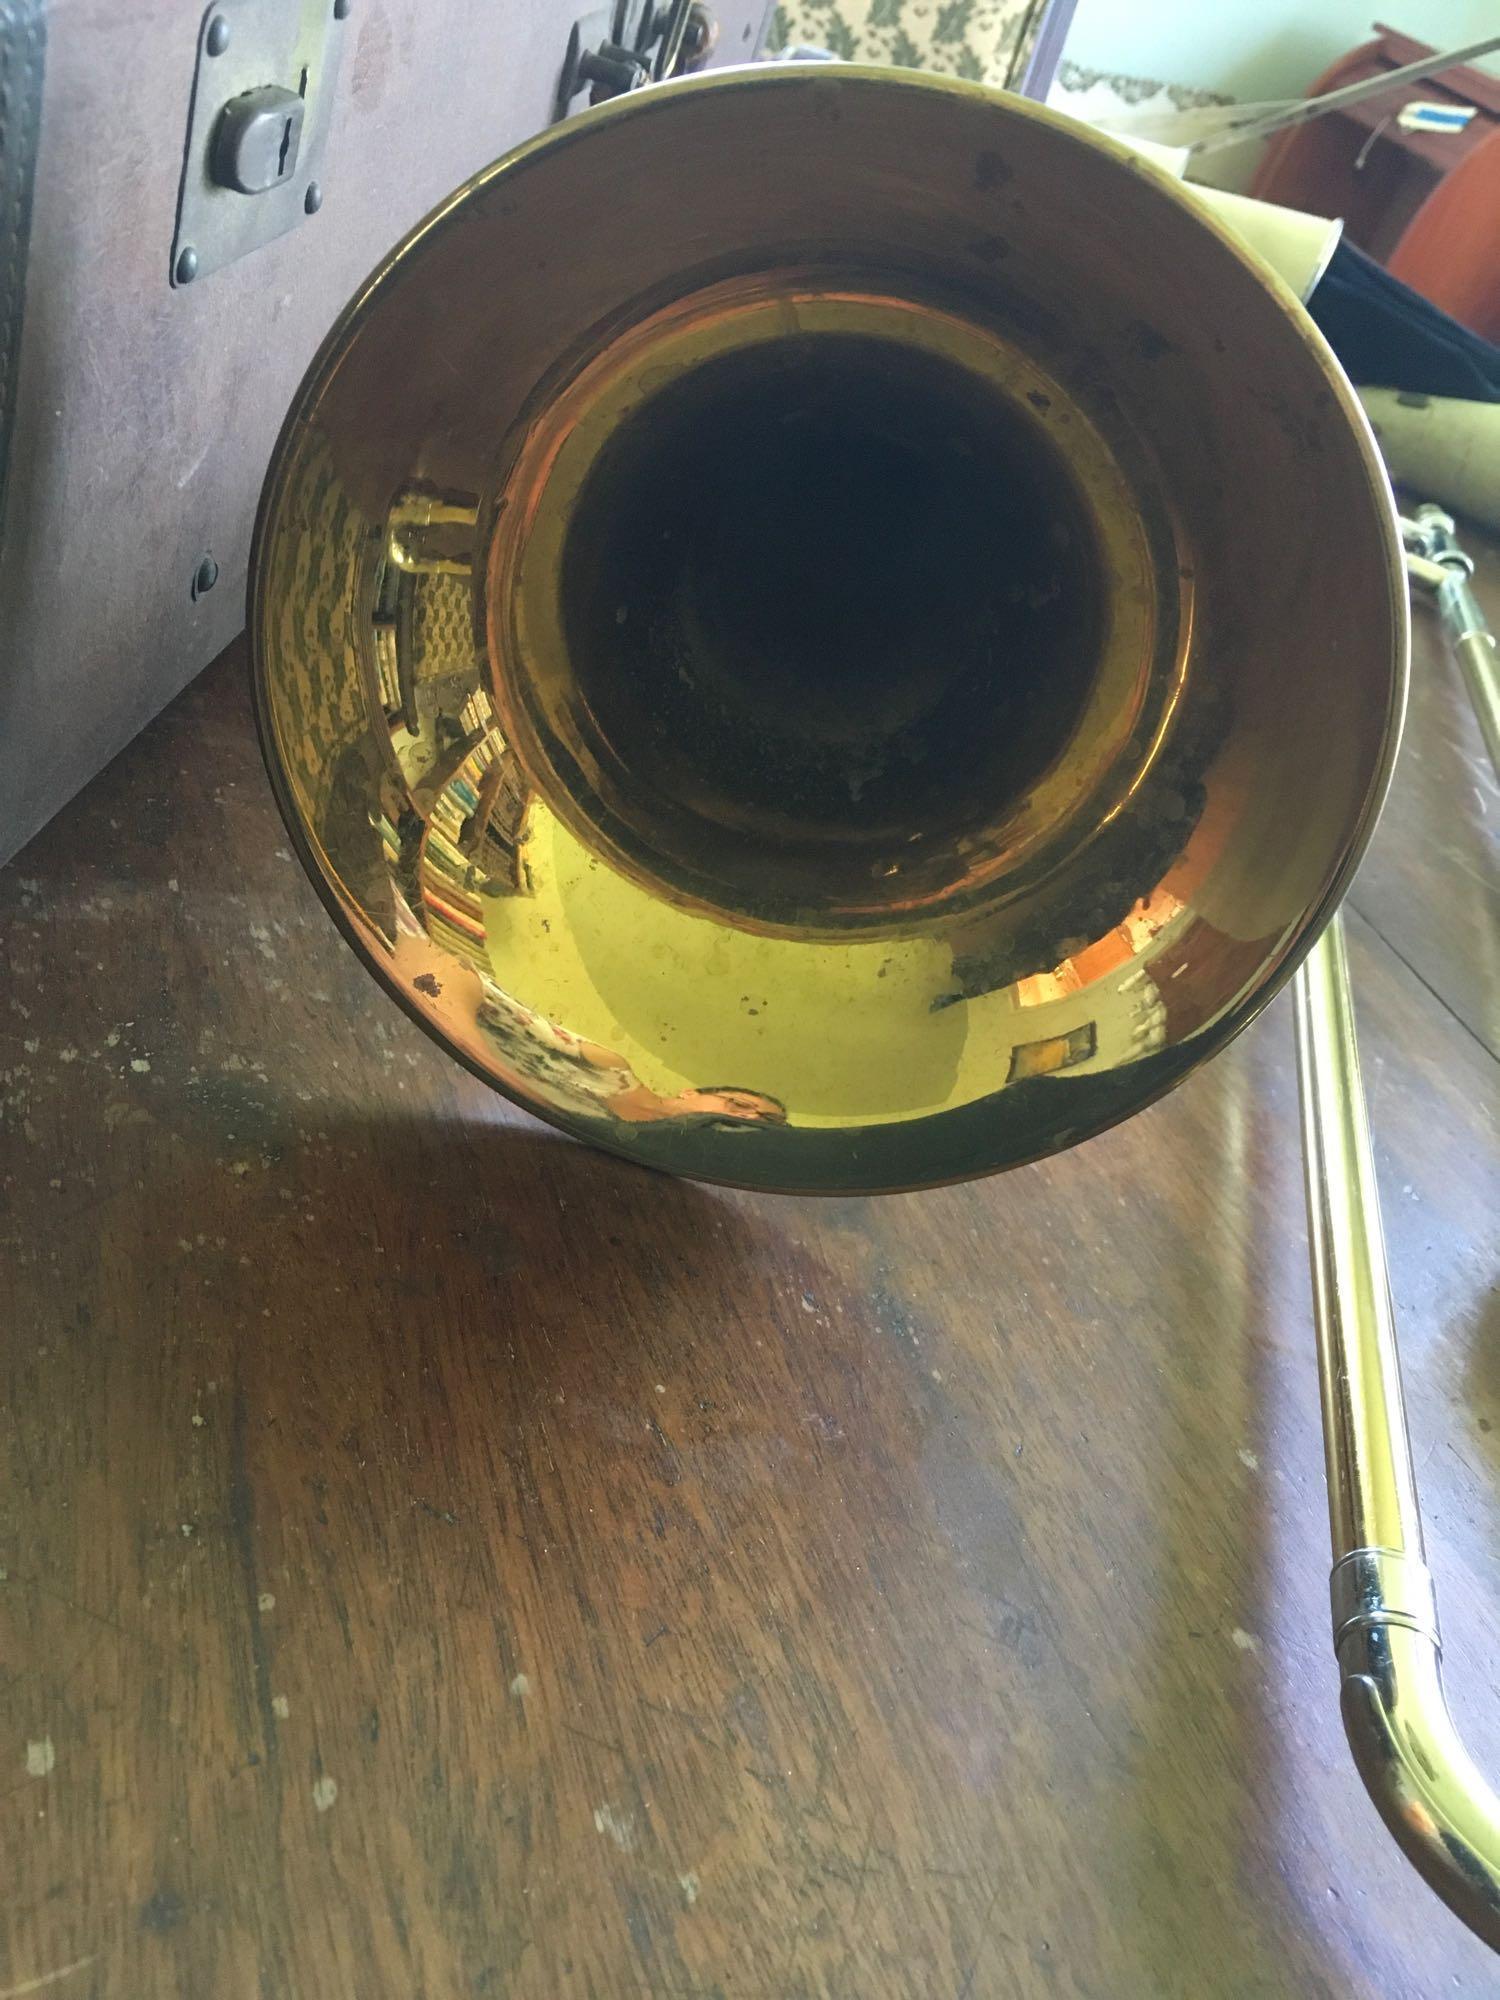 C.G. Conn Trombone Ser. #349013 has Engraved 7" Bell, some minor dents, accessories, West Craft case